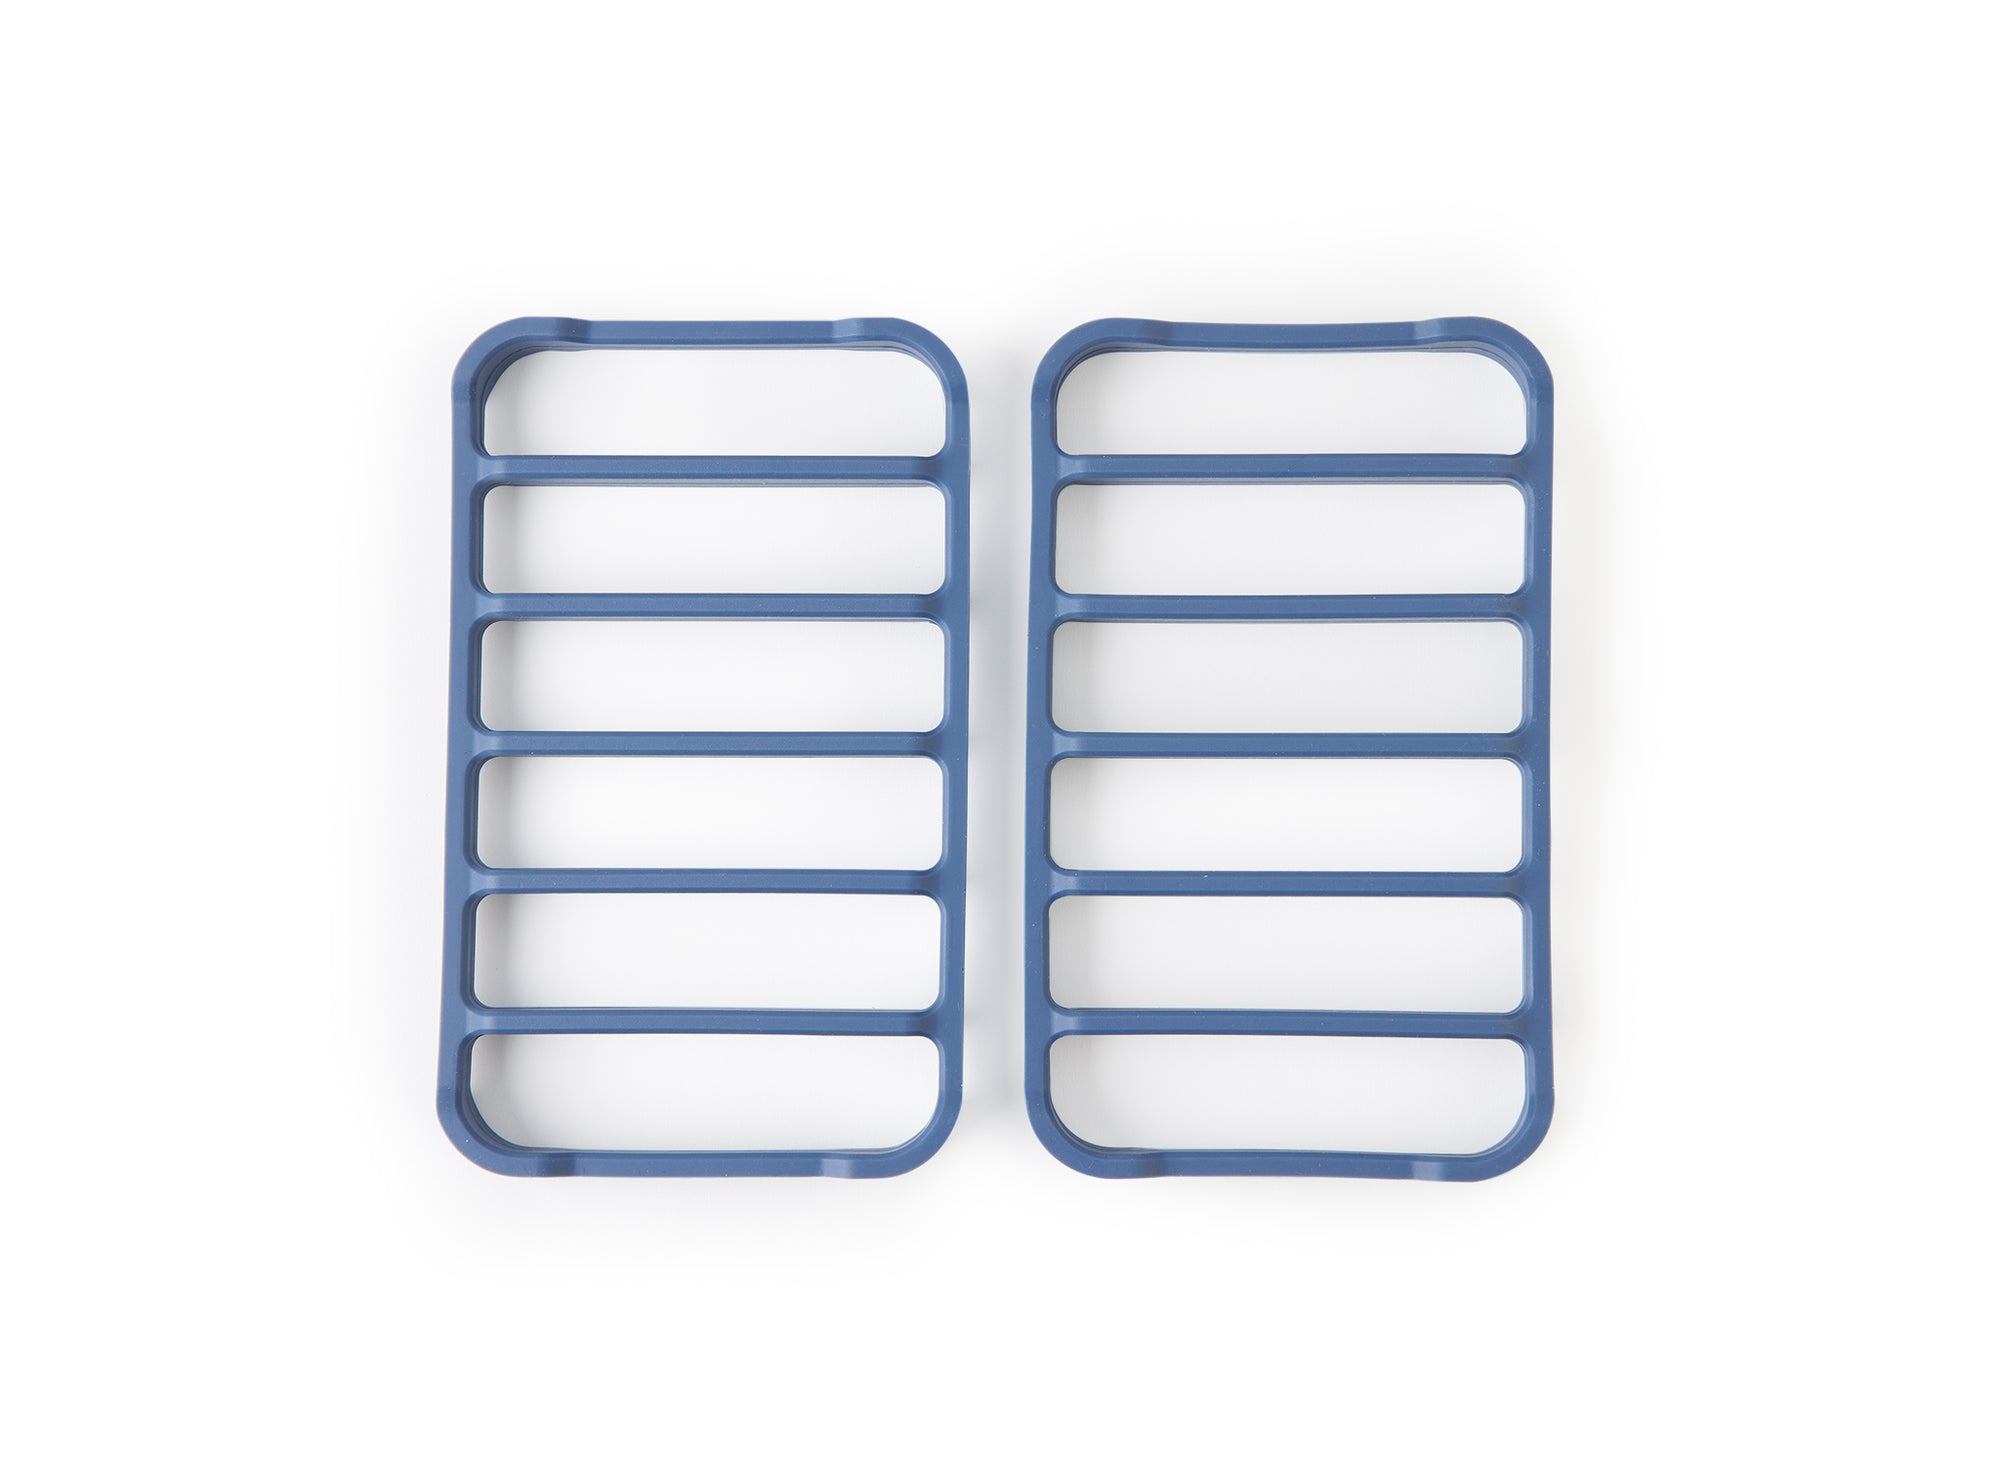 A bird's eye view of two blue Misen Silicone Roasting Racks side by side, on a white background.